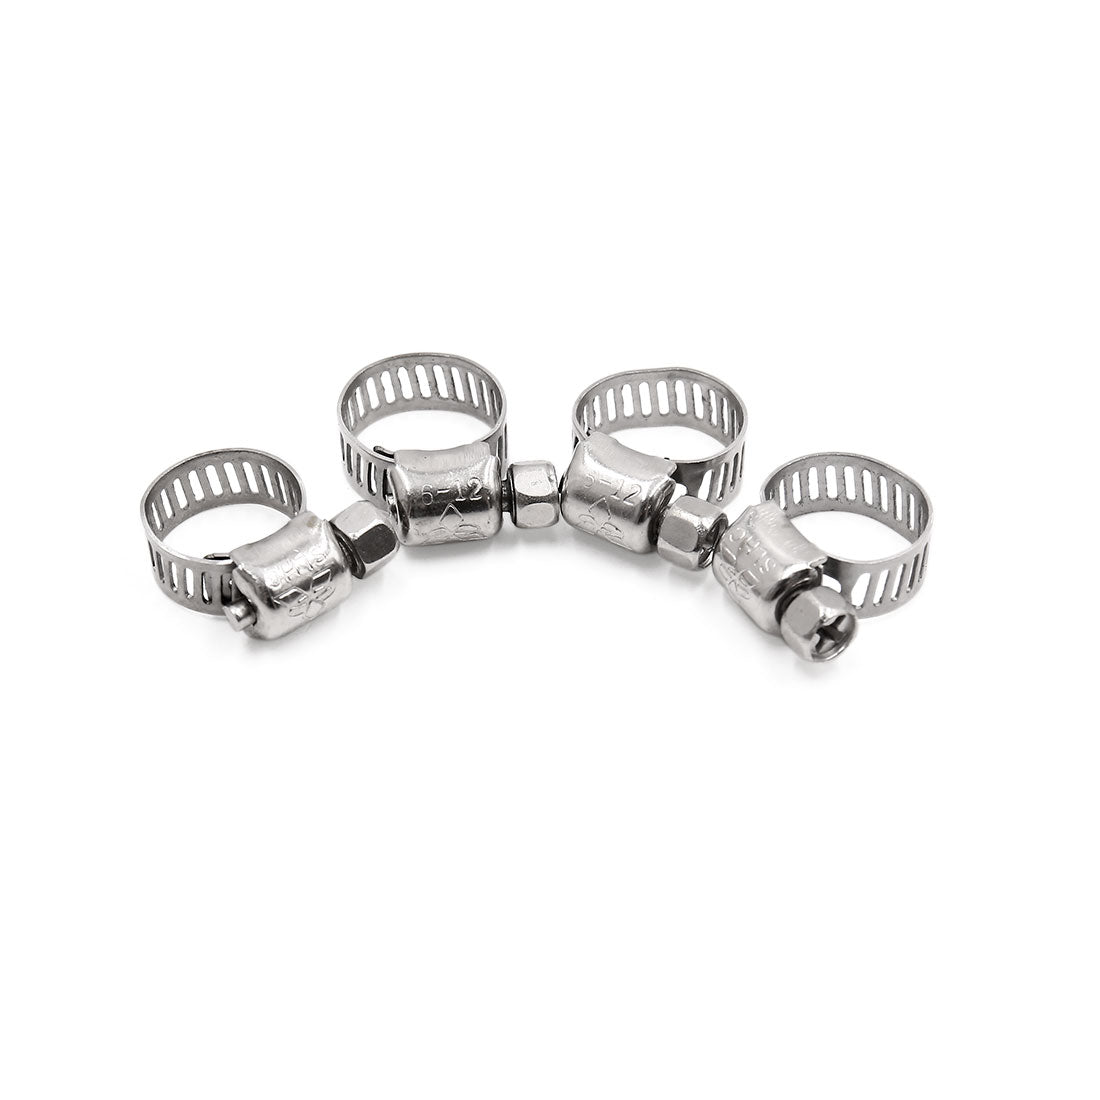 uxcell Uxcell 4pcs Silver Tone Stainless Steel 6-12mm Adjustable  Gear Car Hose Clamp